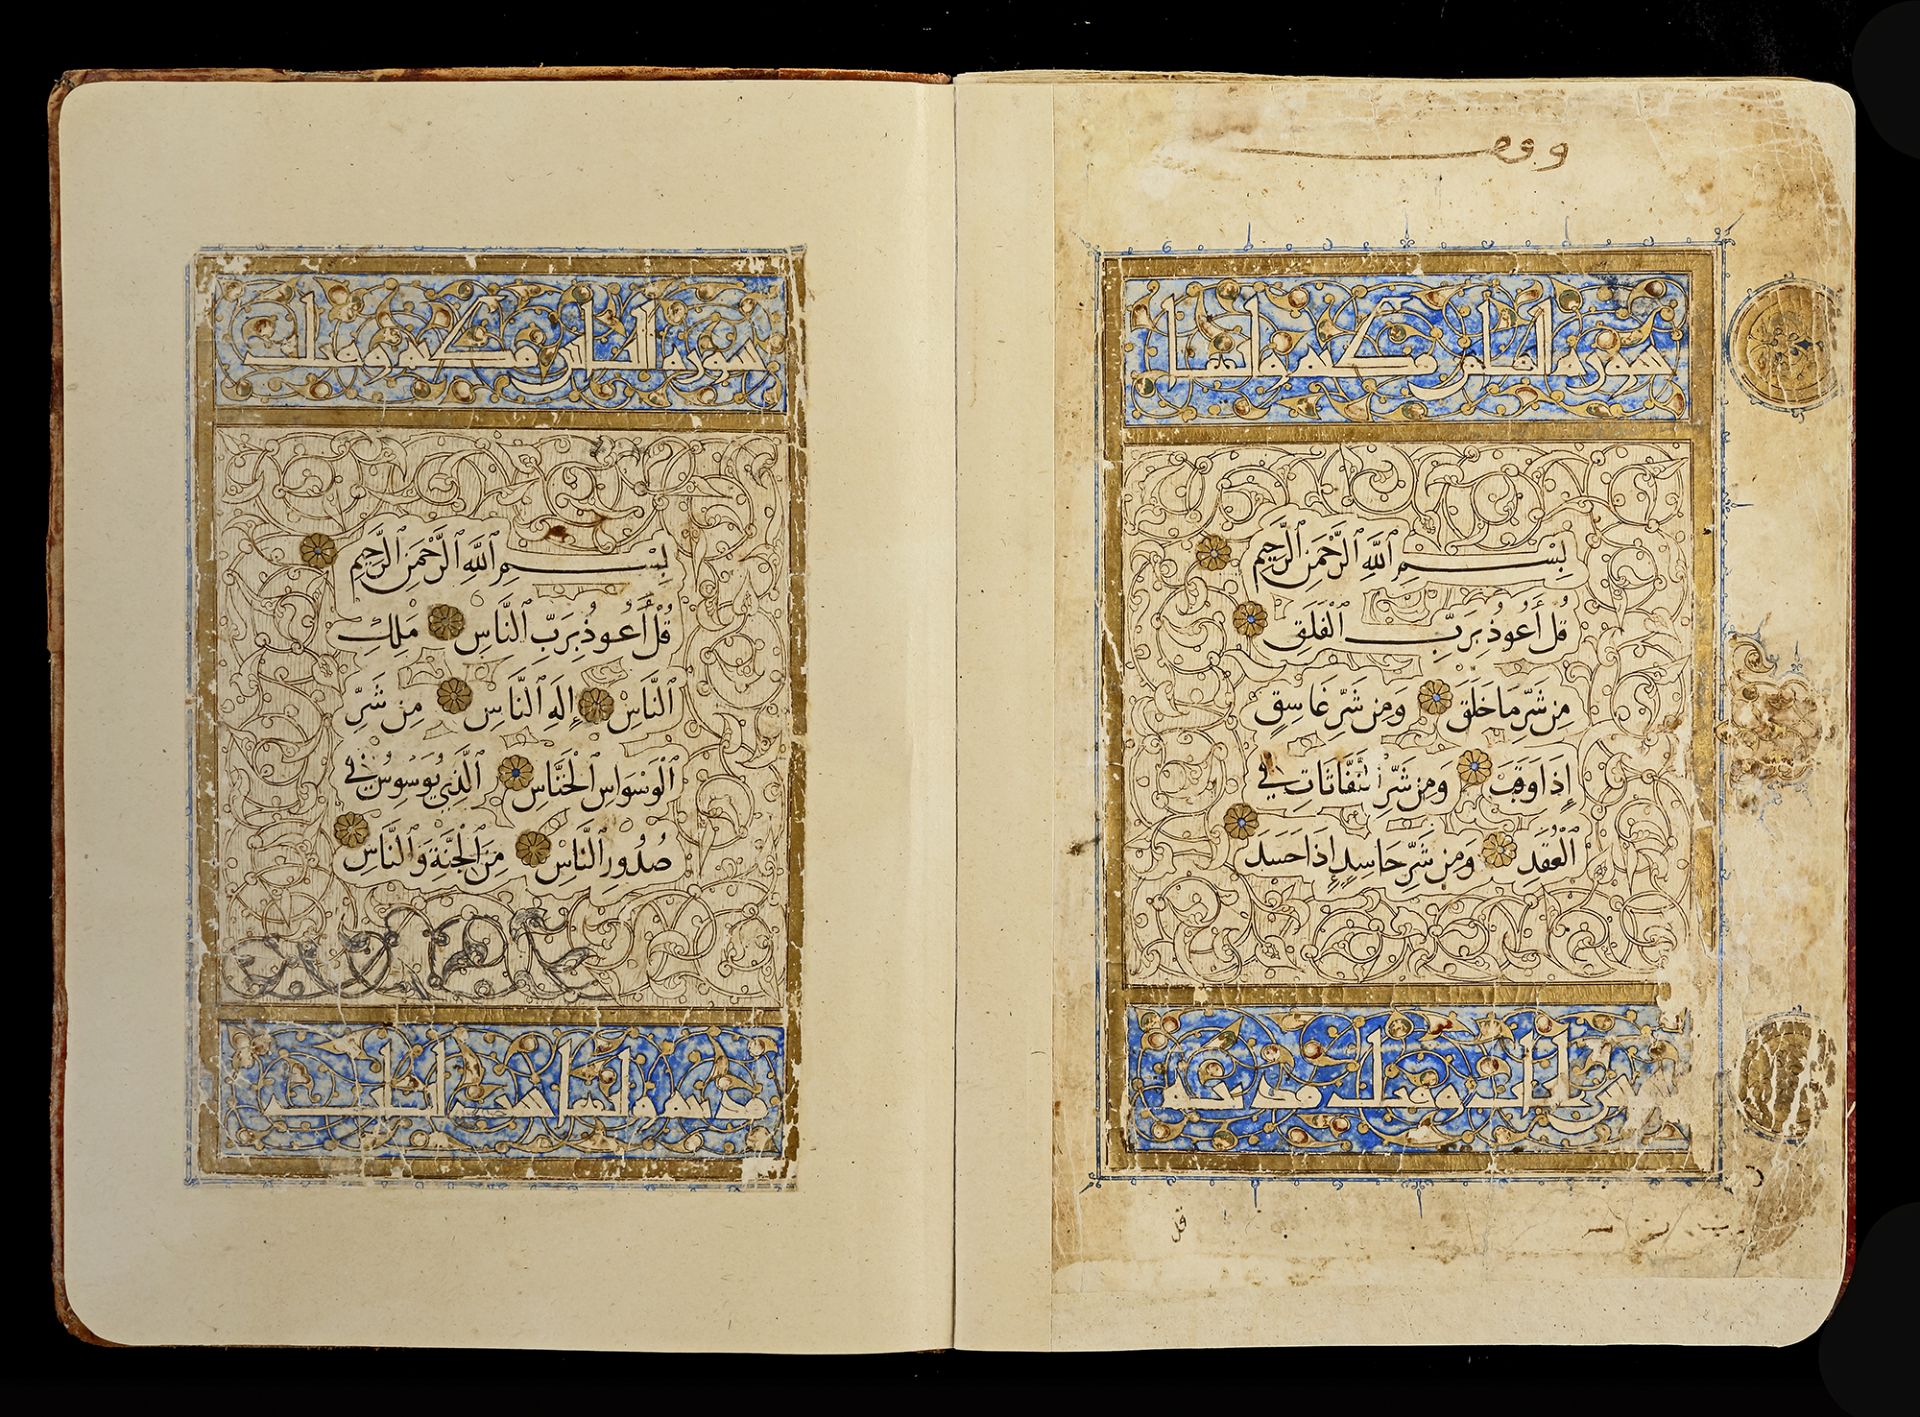 A MAMLUK QURAN (THE BAHRI DYNASTY) ATTRIBUTED TO SANDAL (ABU BAKR) SCHOOL OR STYLE, 1250-1382 AD - Image 4 of 34